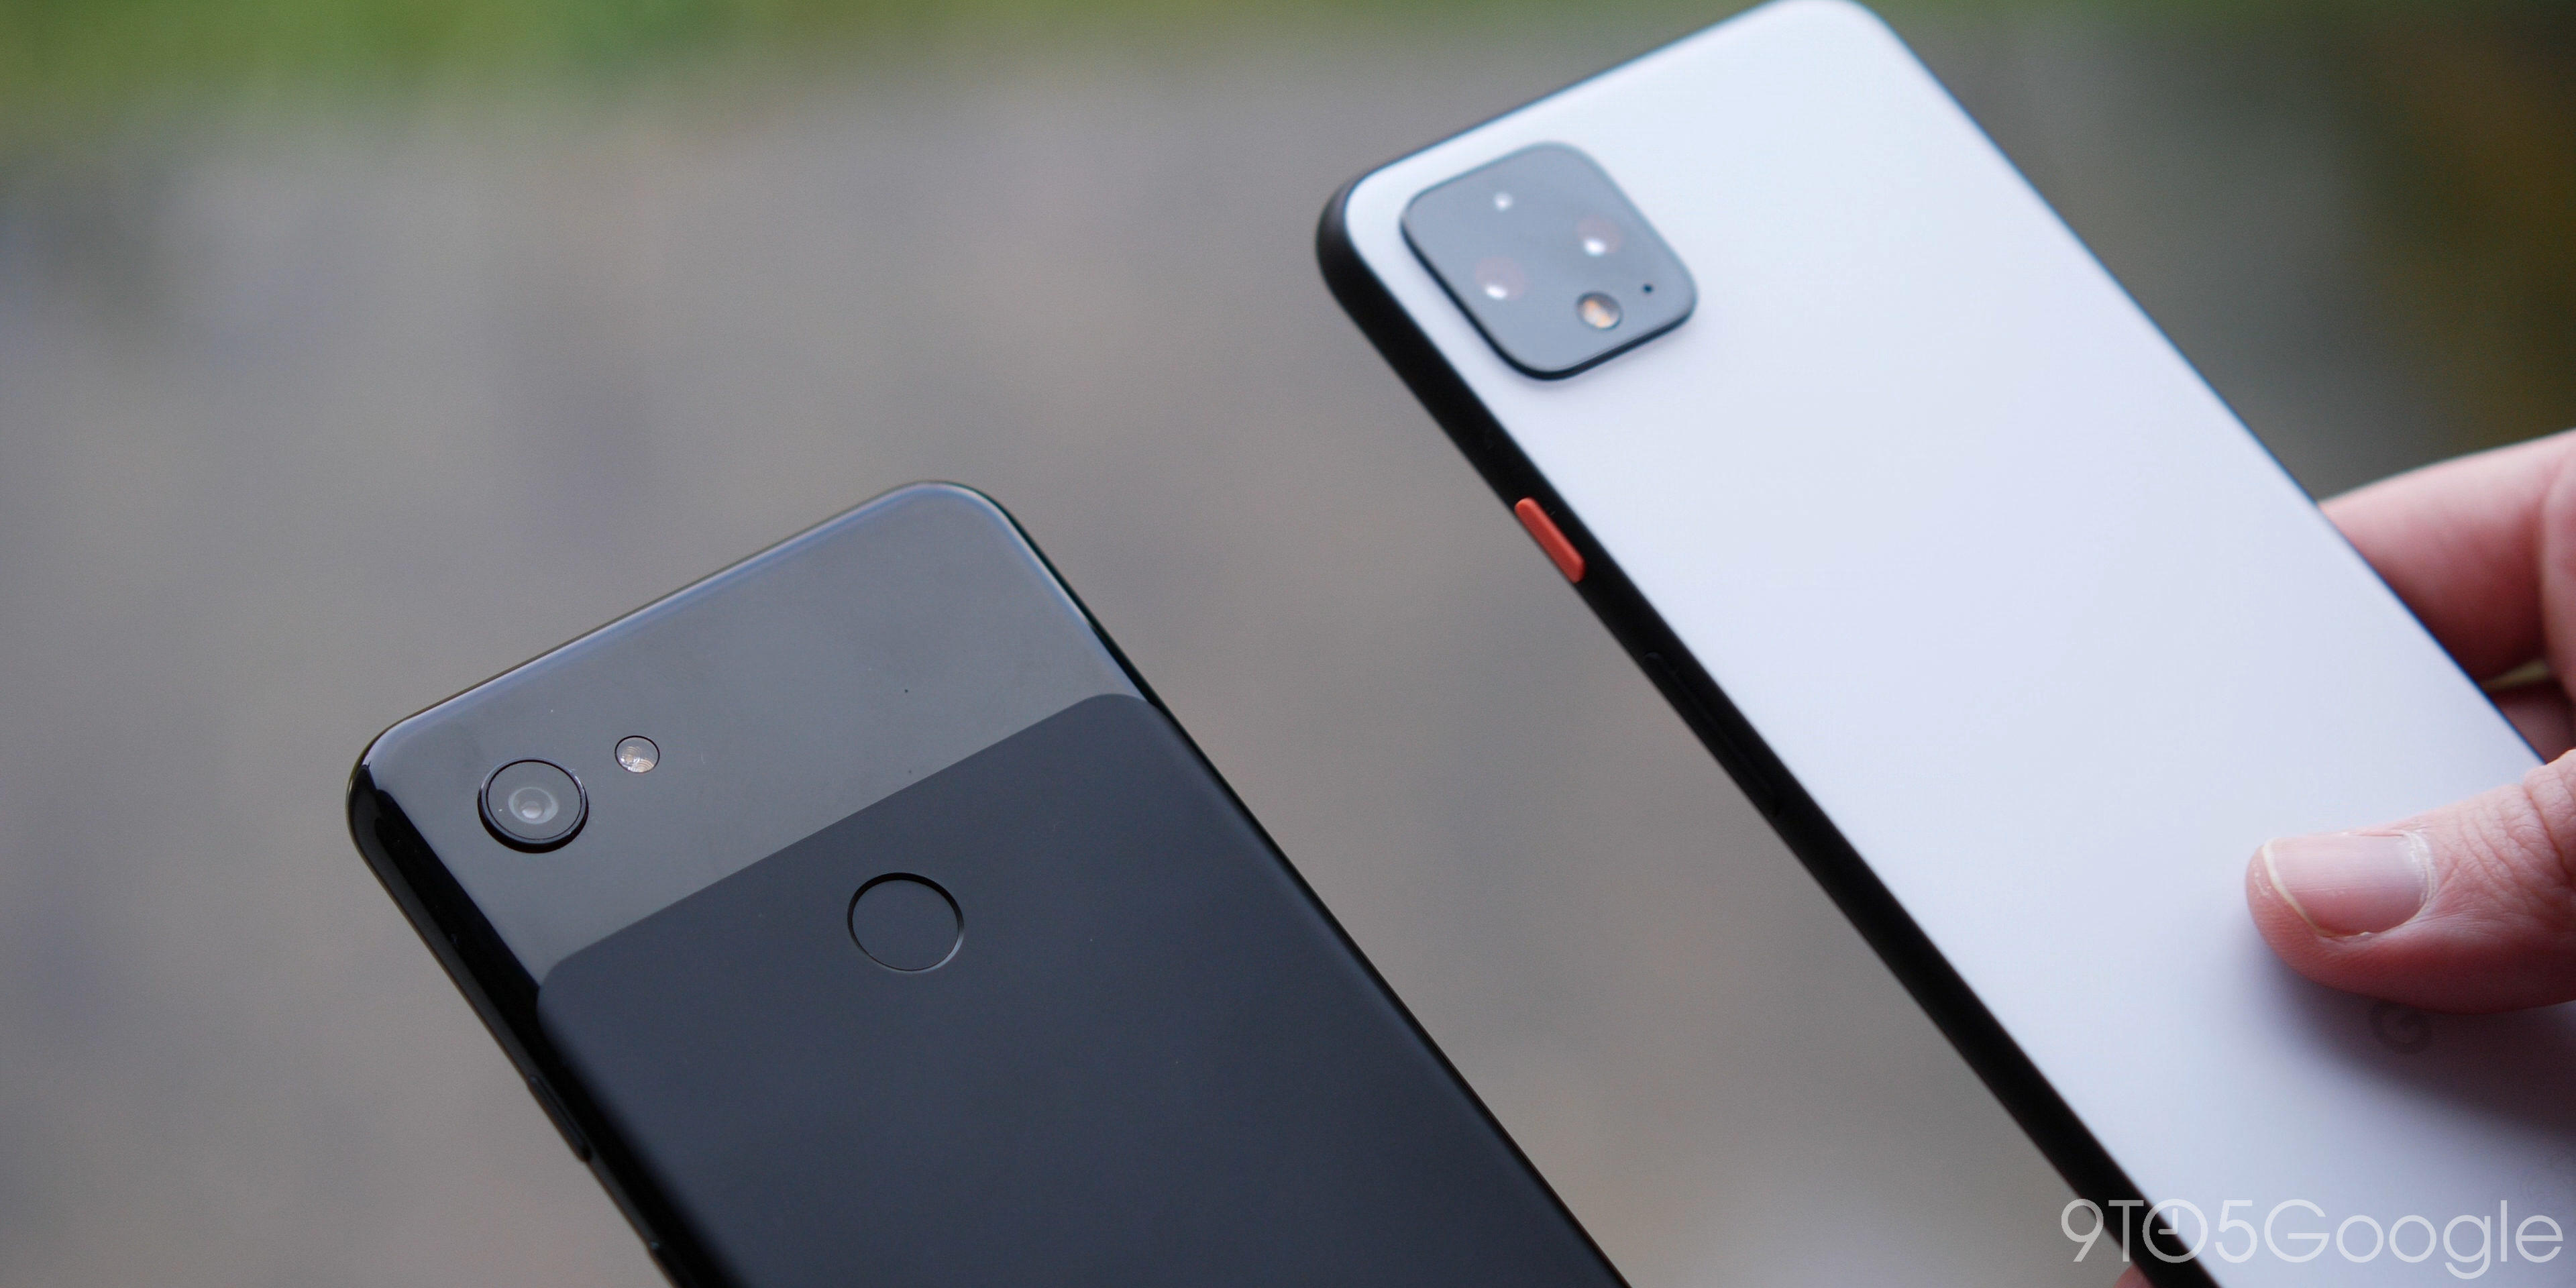 Google Store Uk Discounts Pixel 3a And 4 W Promo Codes 9to5google